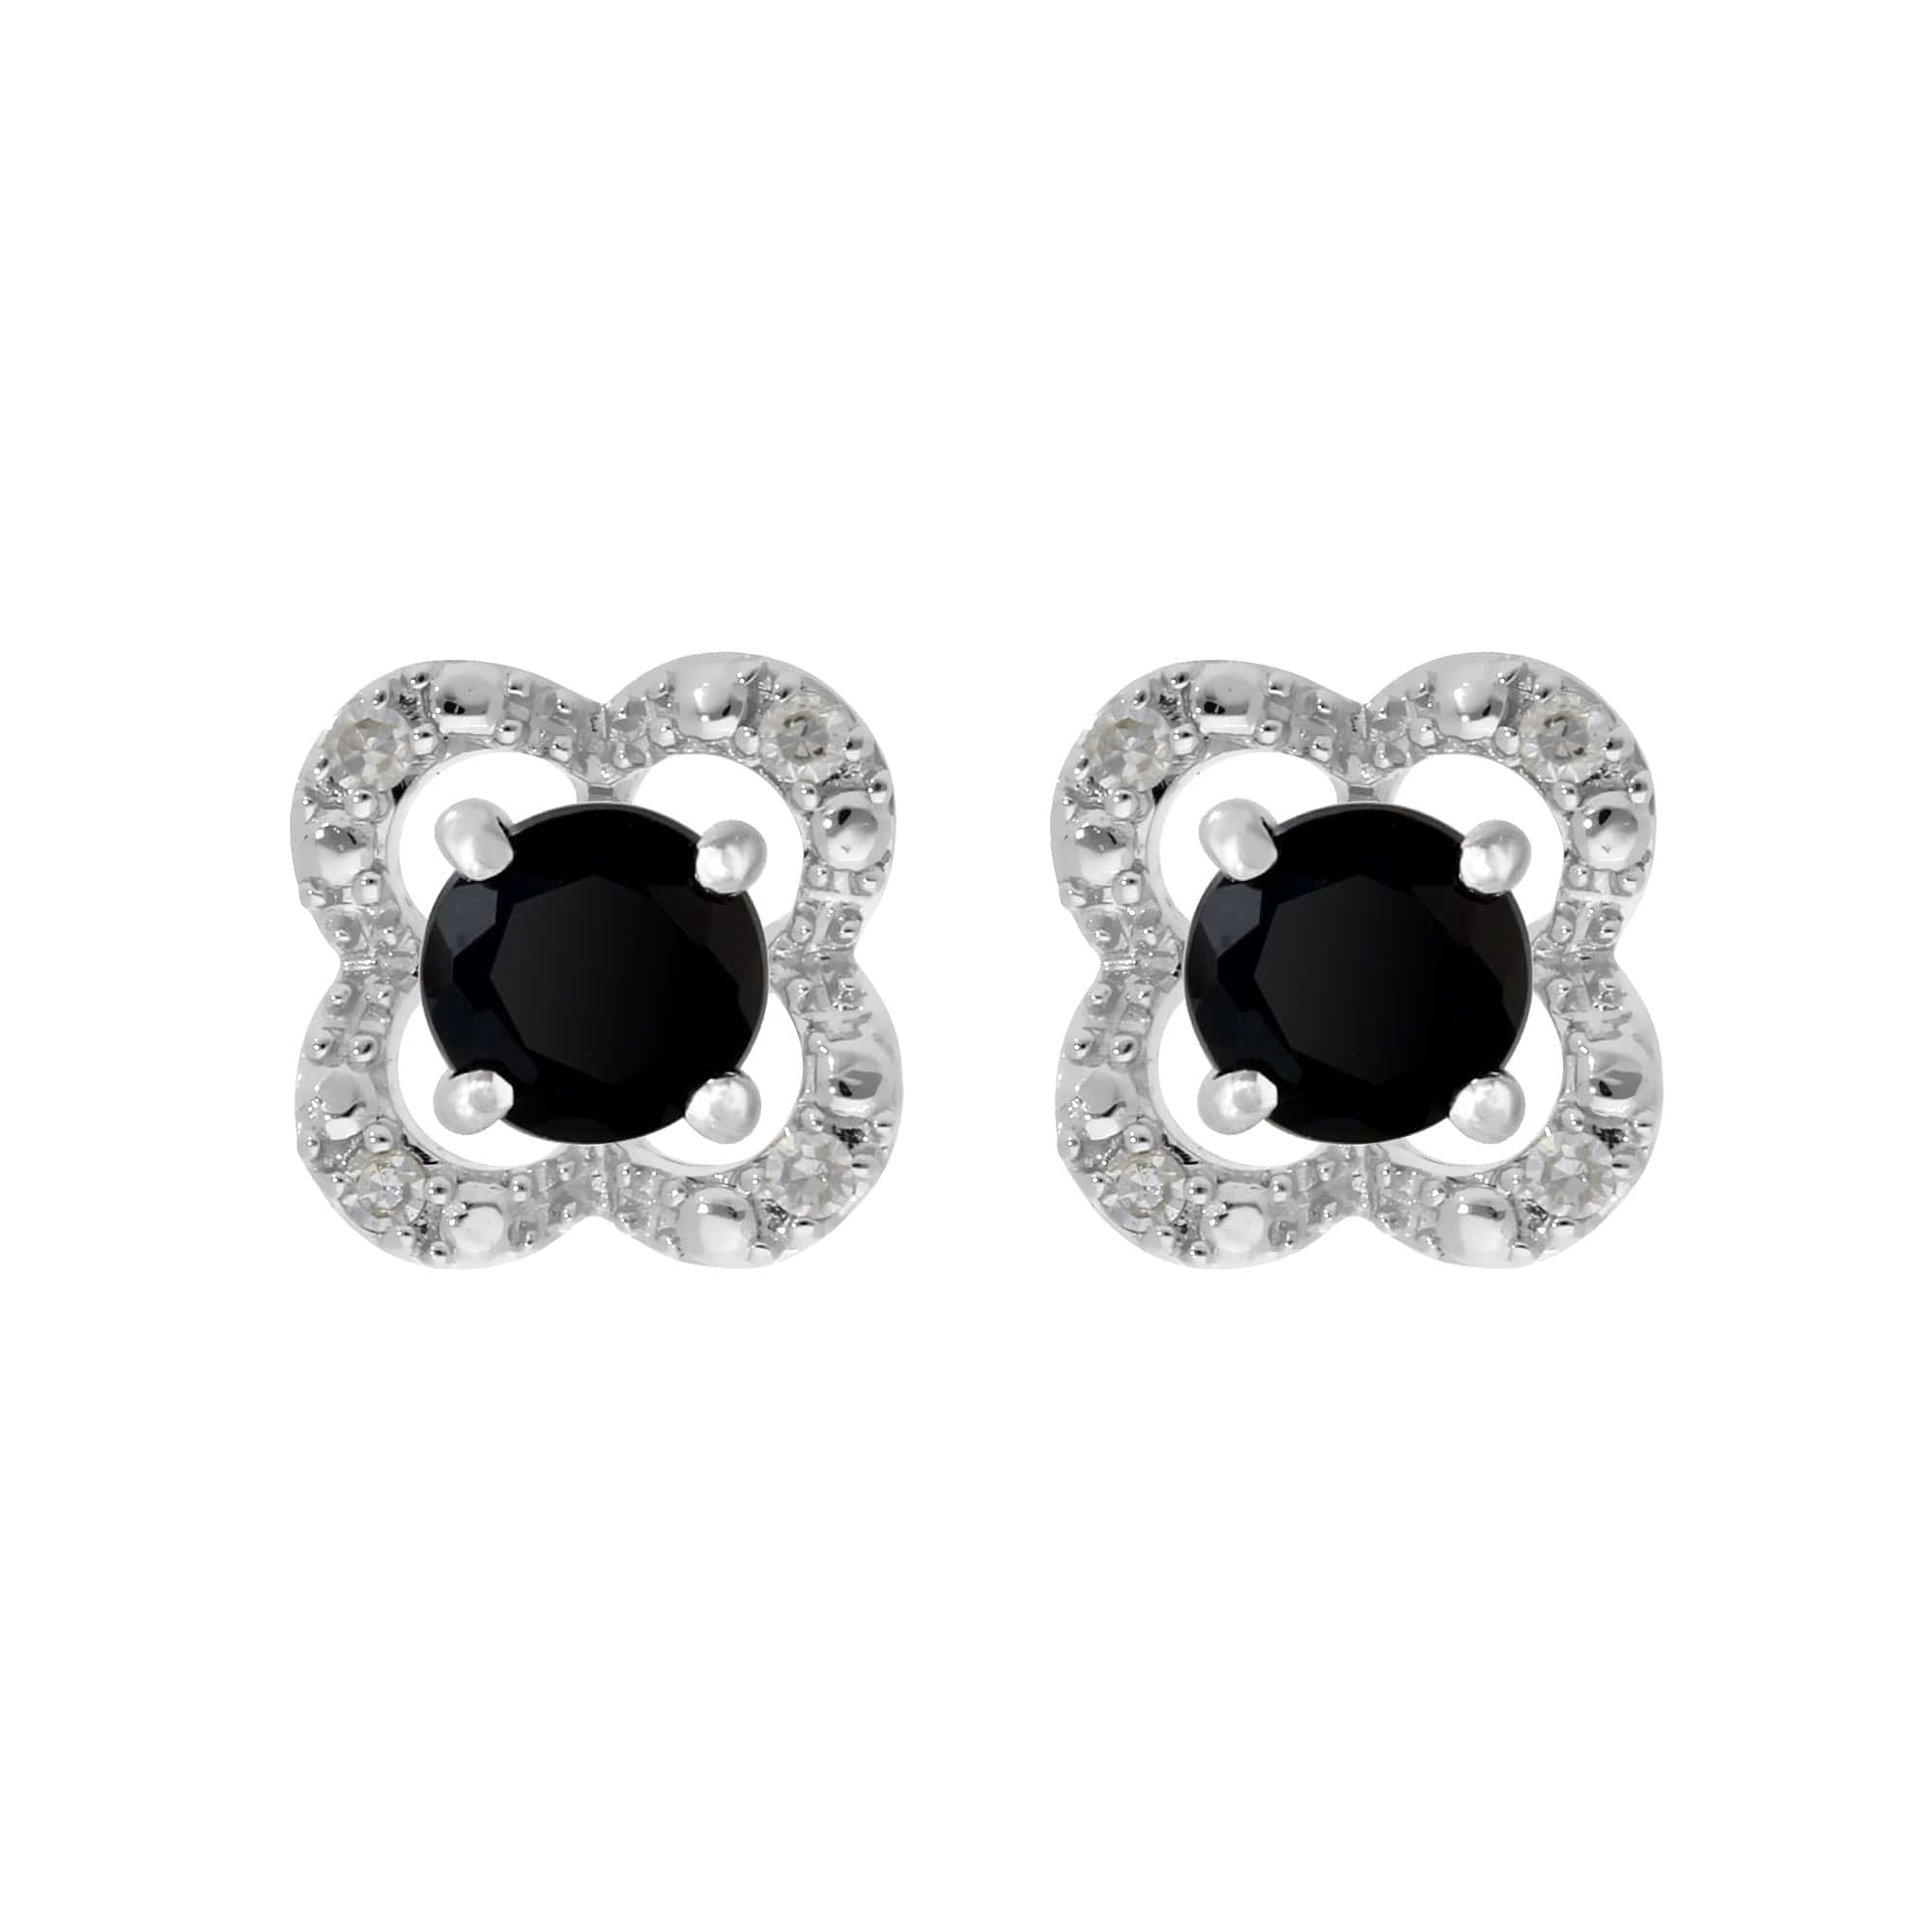 117E0031119-162E0244019 Classic Round Black Onyx Studs with Detachable Diamond Flower Ear Jacket in 9ct White Gold 1